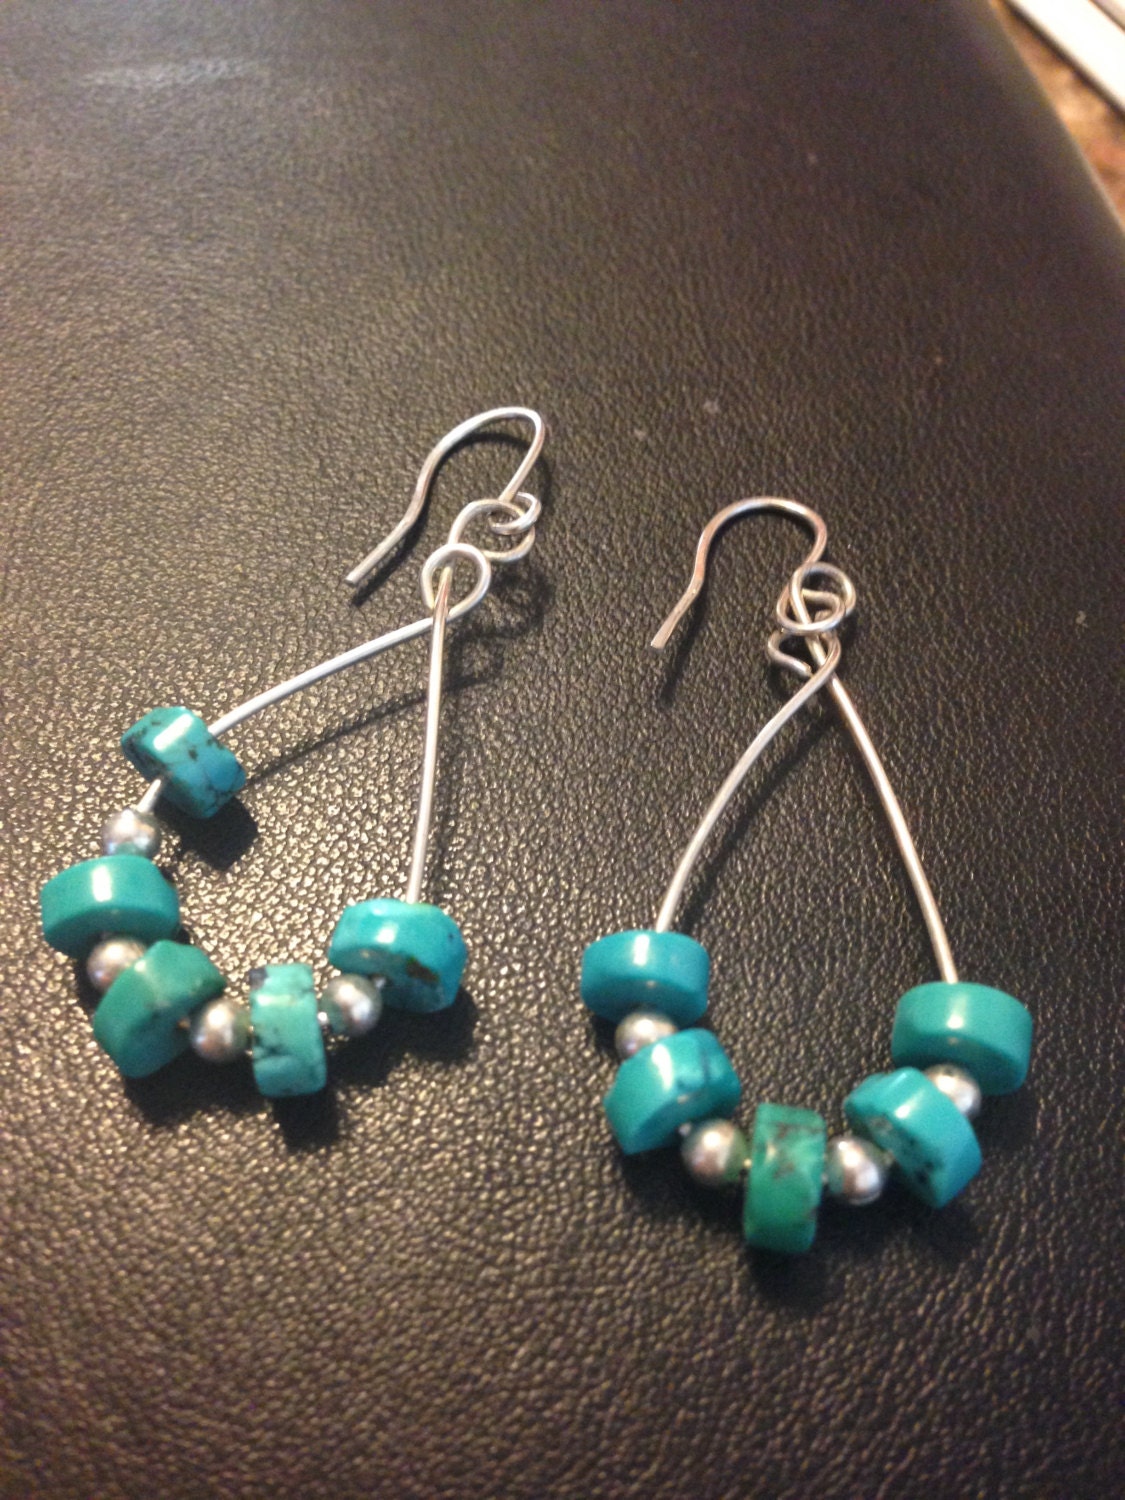 Turquoise and Sterling Hoop Earrings. Heishi Beads Strung With - Etsy